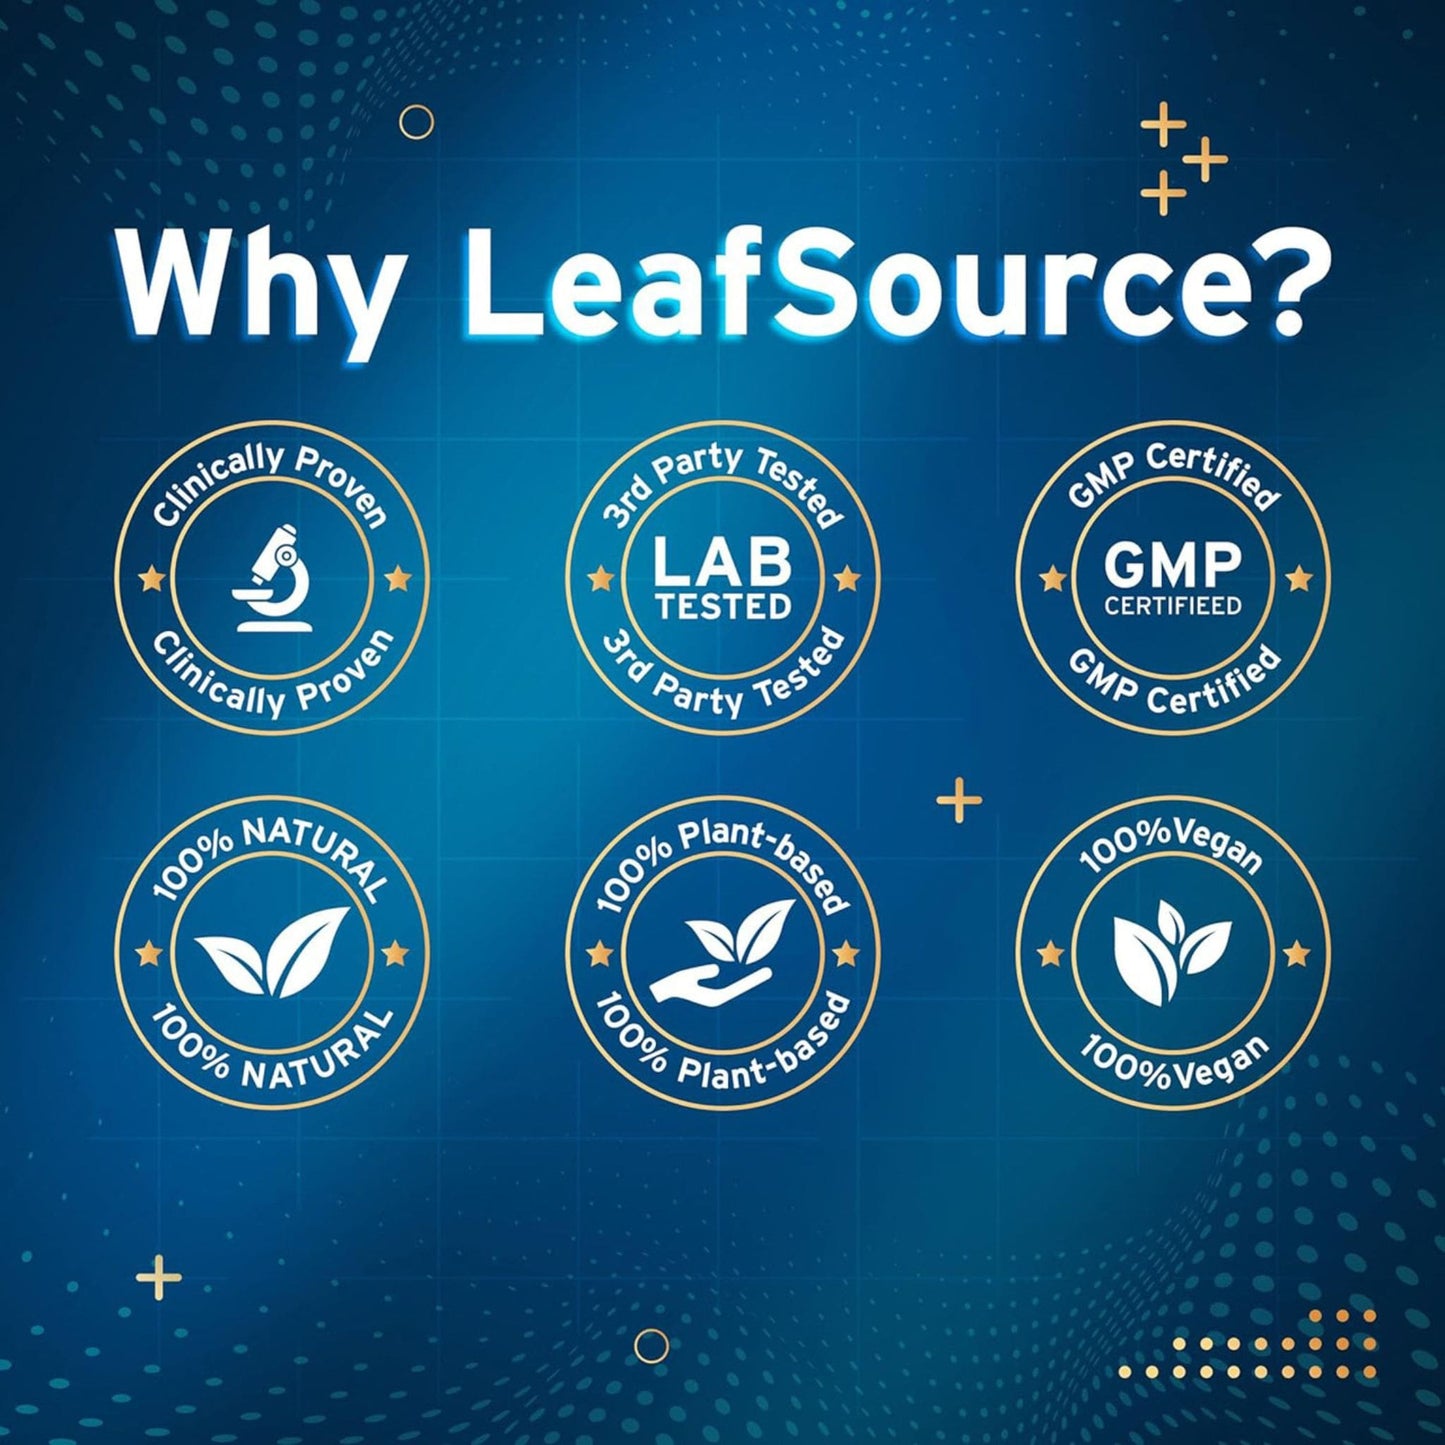 100 Vegetable Capsules | LeafSource Cold Formula